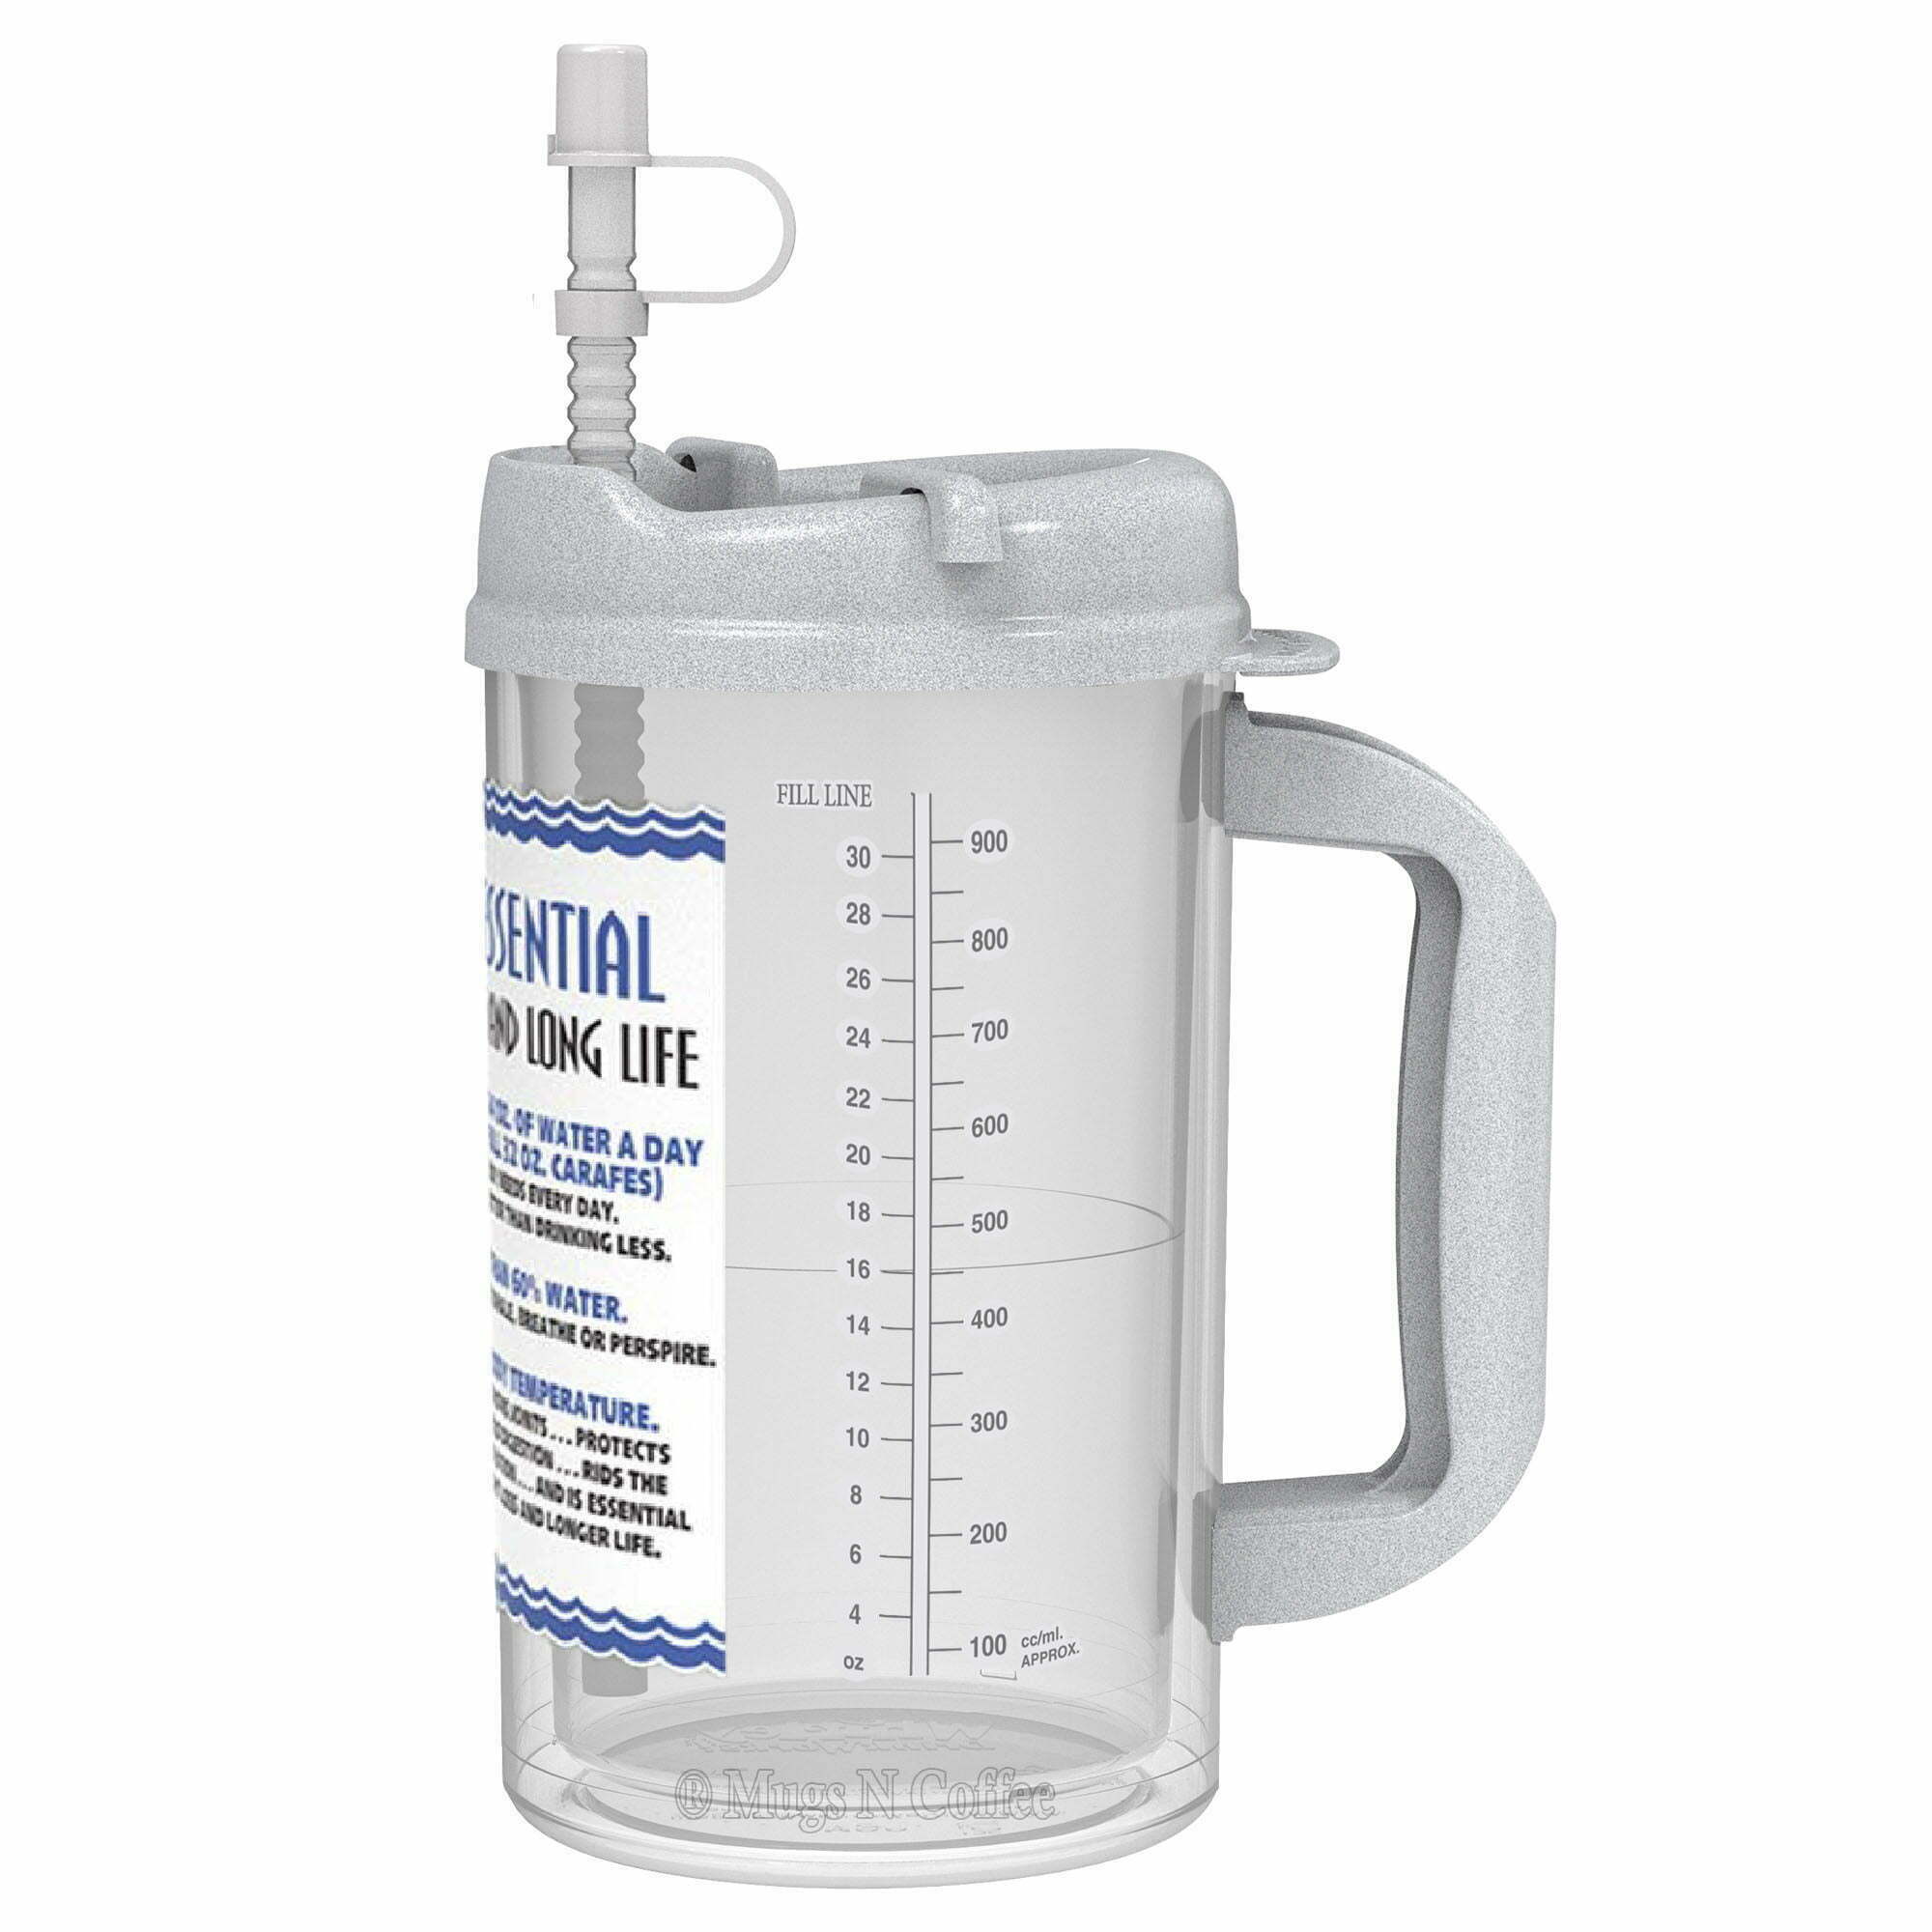 https://www.mugsncoffee.com/wp-content/uploads/2022/10/32-oz-Insulated-Water-Essential-Hospital-Mug-with-Straw-Whirley-Drink-Granite-Lid-and-Handle.jpg